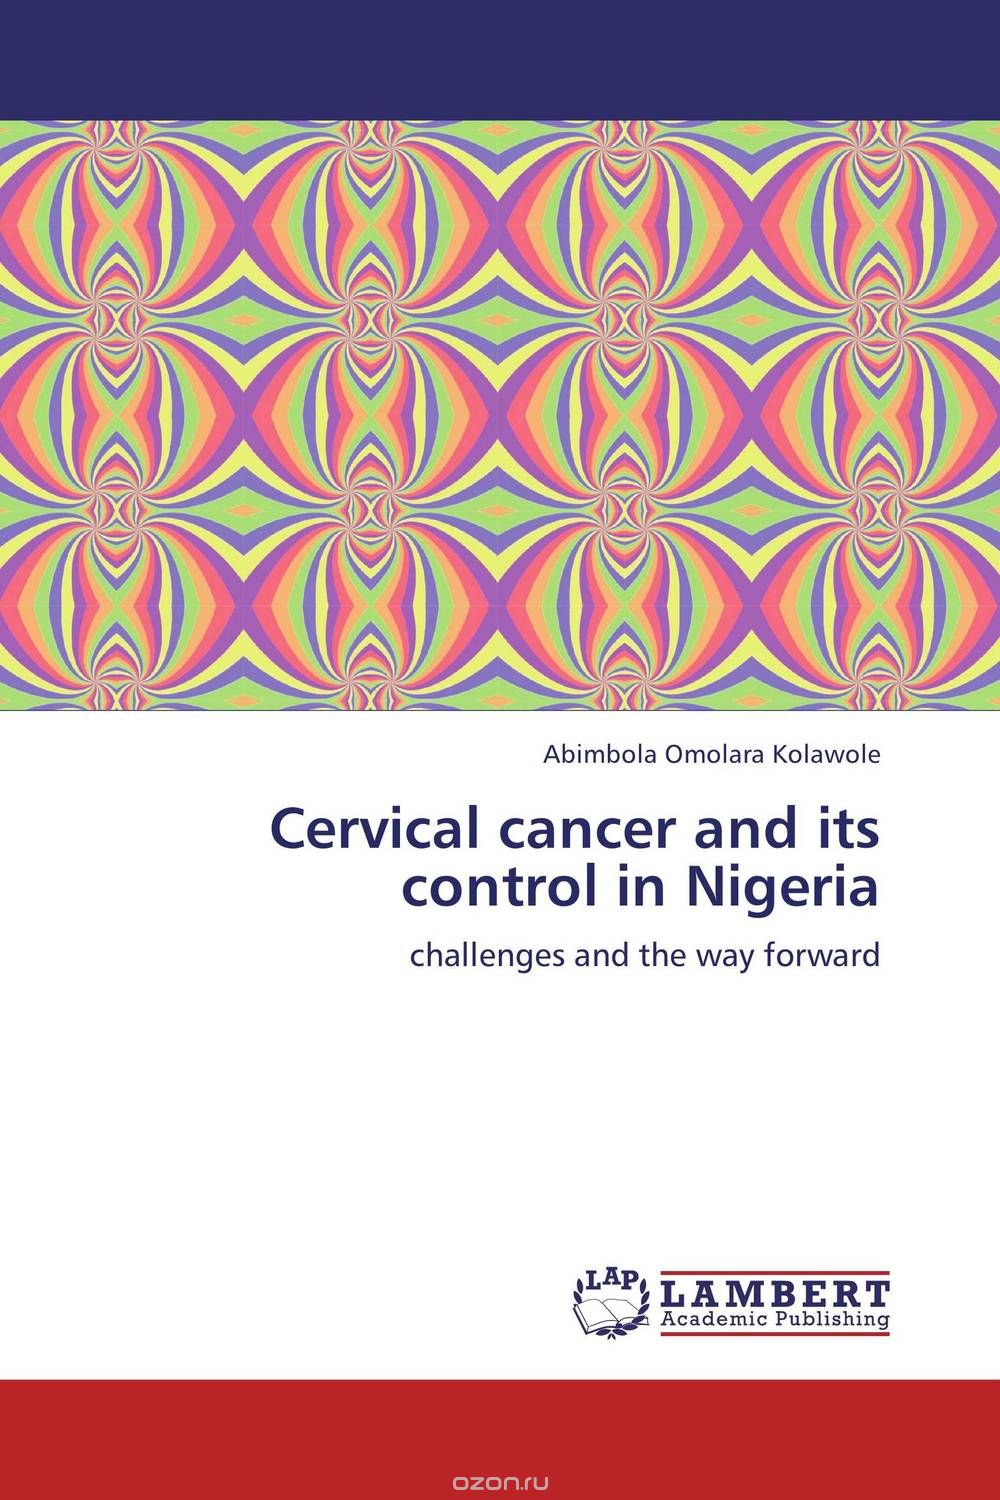 Скачать книгу "Cervical cancer and its control in Nigeria"